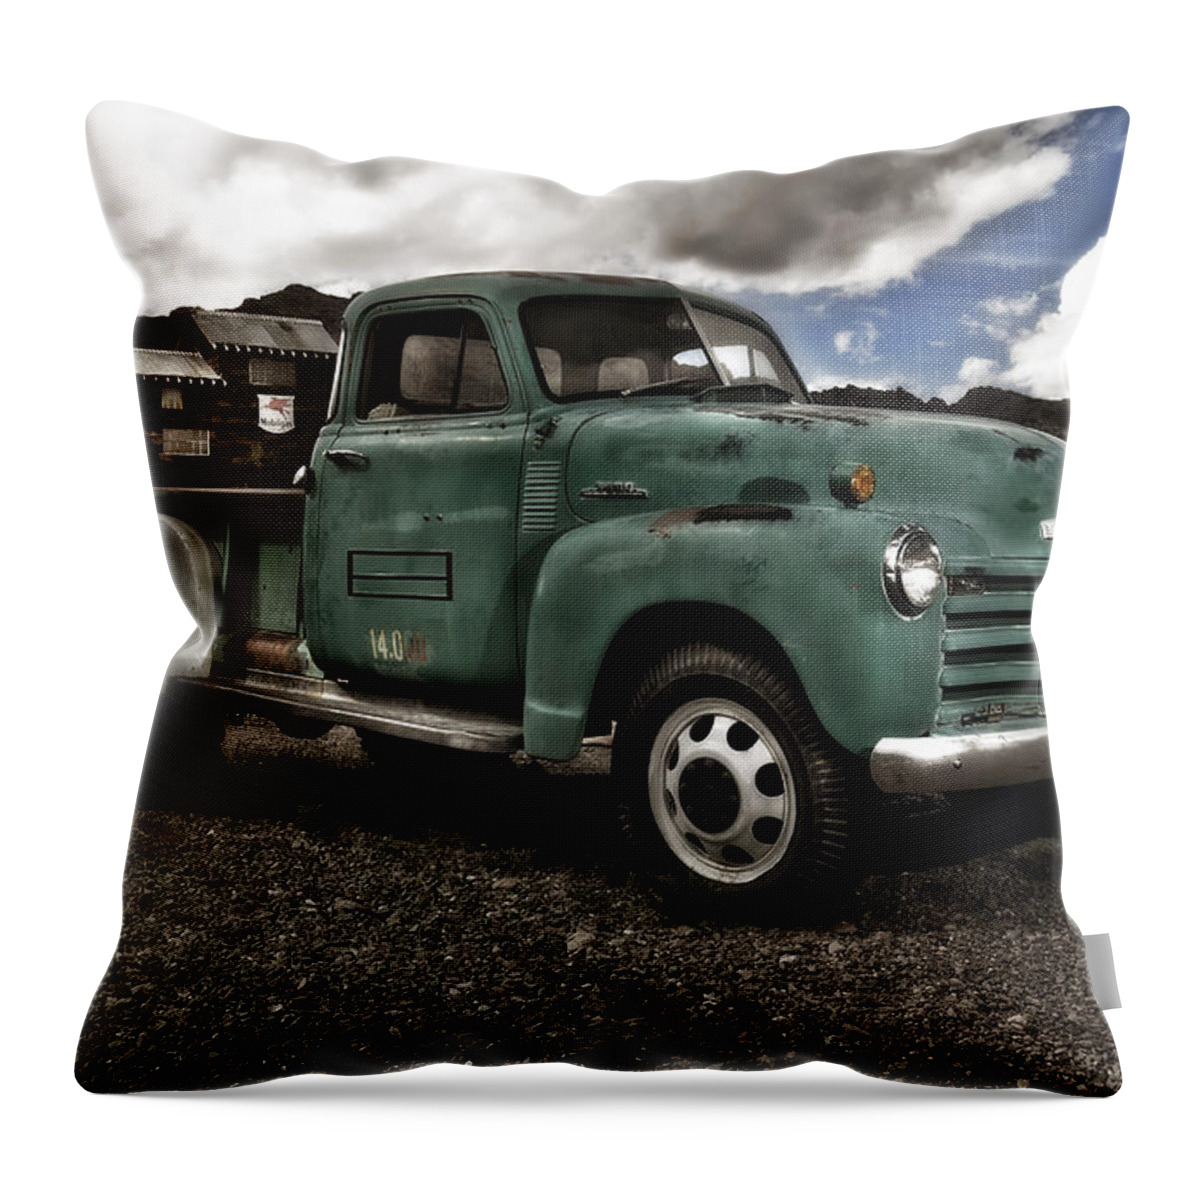 Car Throw Pillow featuring the photograph Vintage Green Chevrolet Truck by Gianfranco Weiss